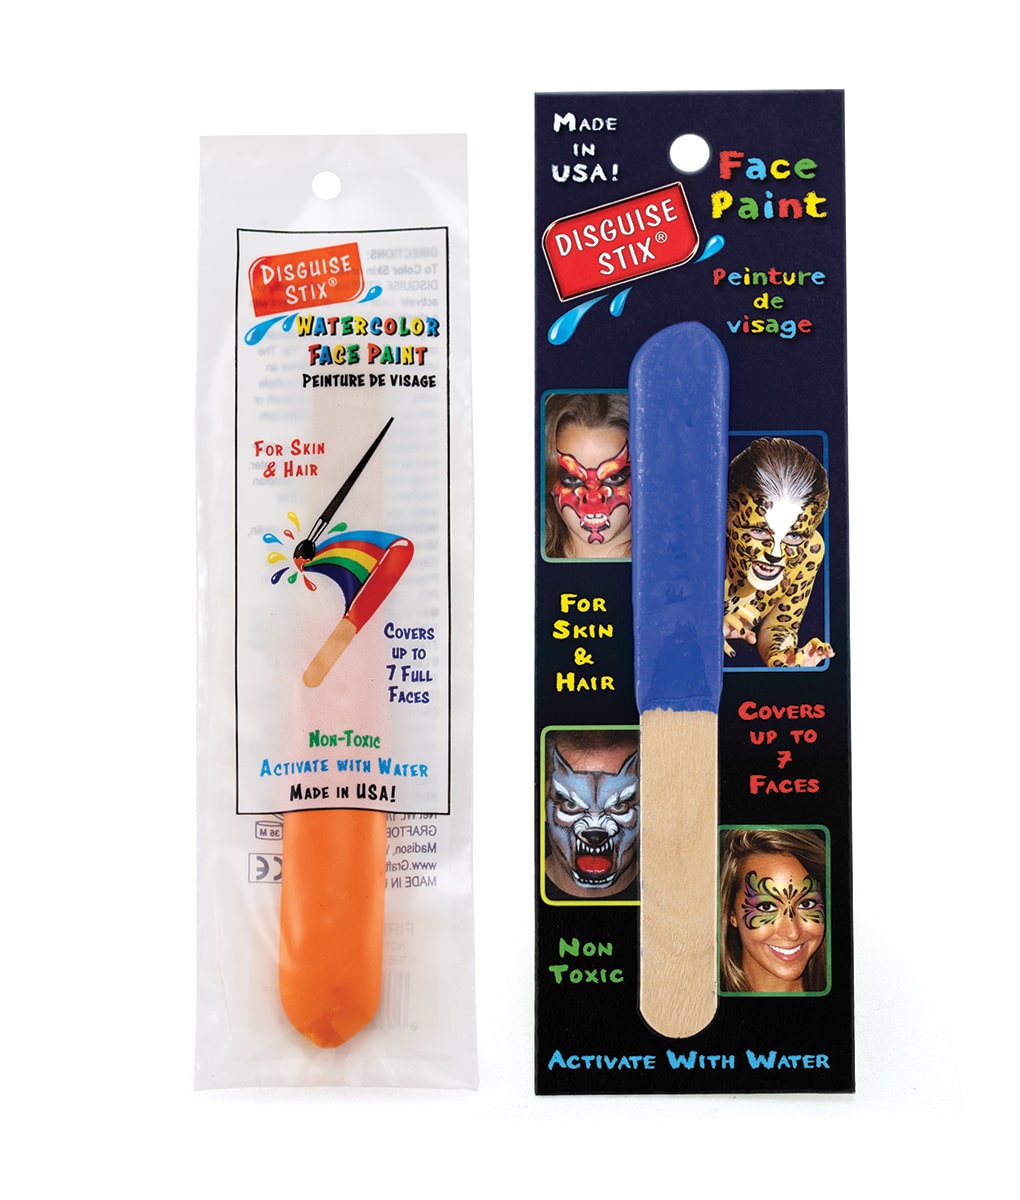 Disguise Stix® Watercolor Face Paint – Graftobian Make-Up Company